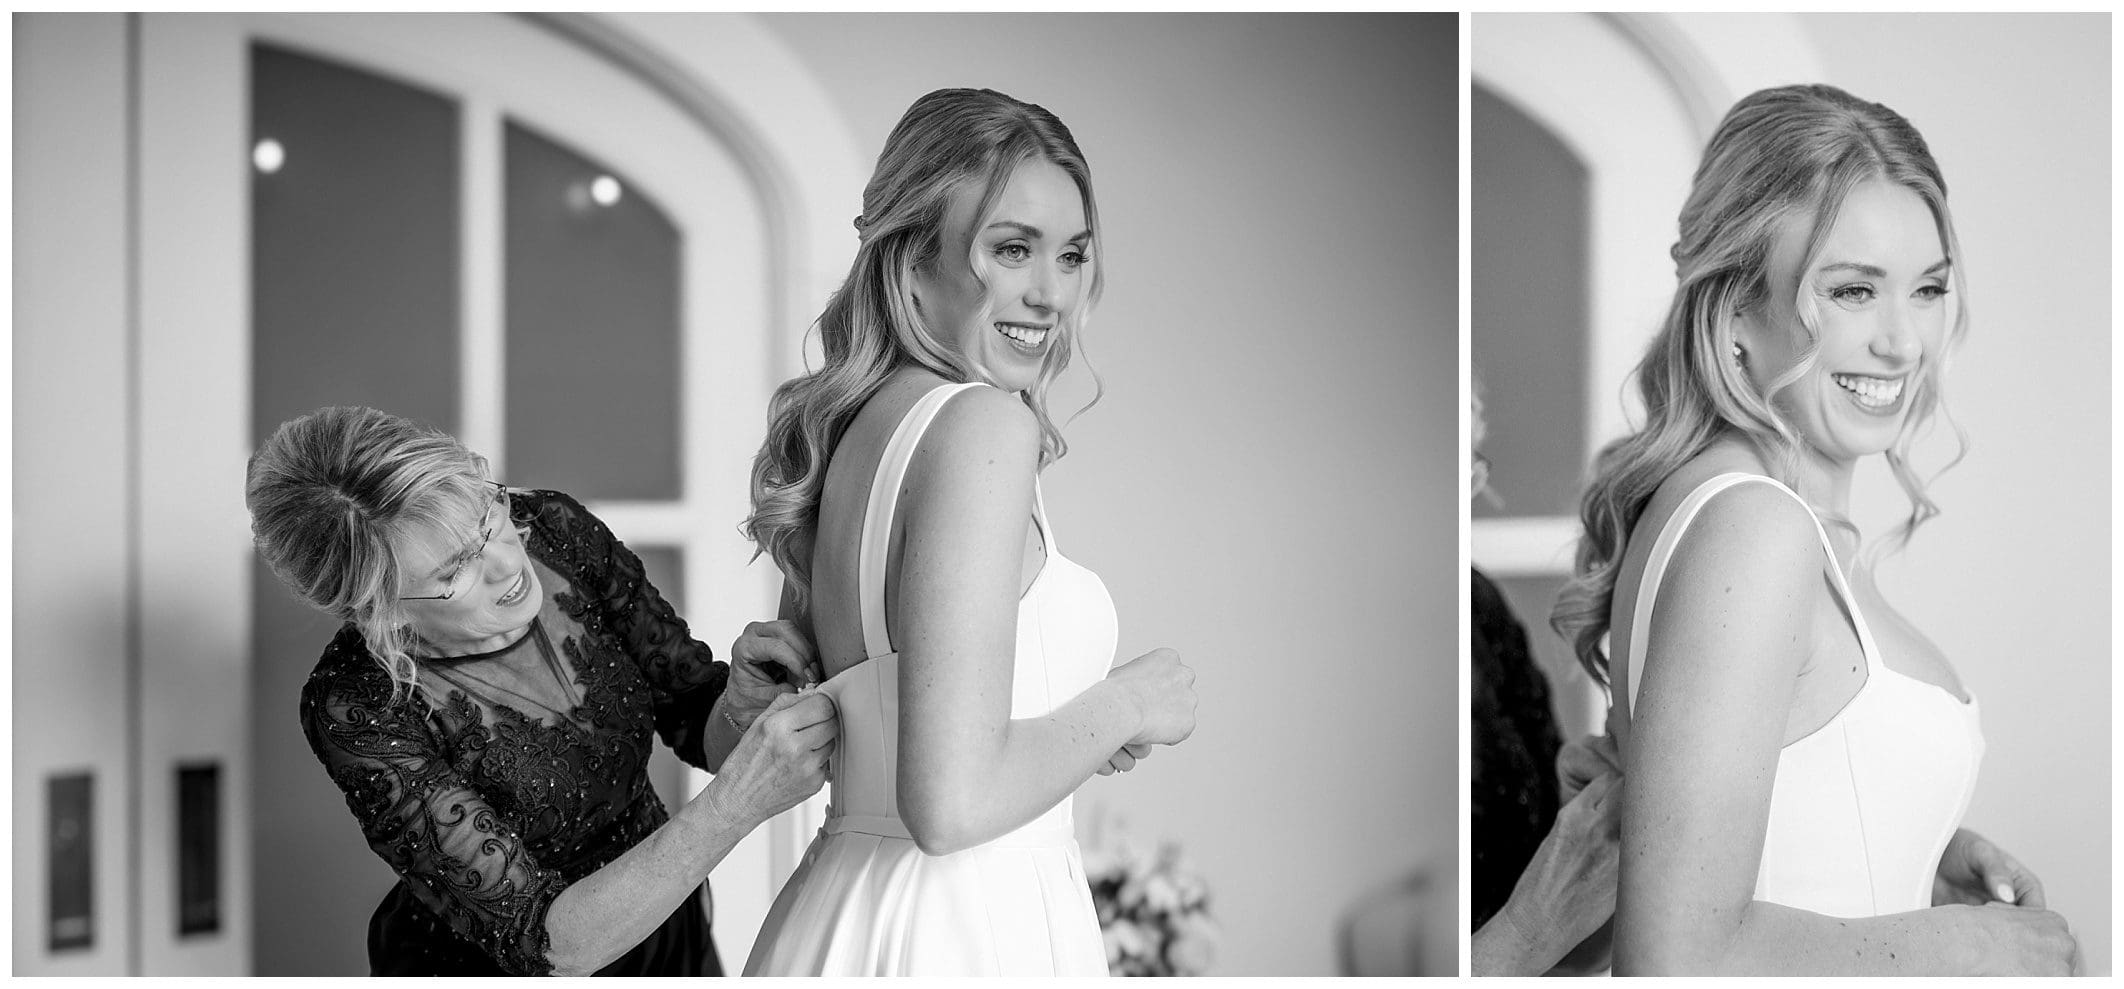 Two black and white photos of a bride getting ready for her wedding.